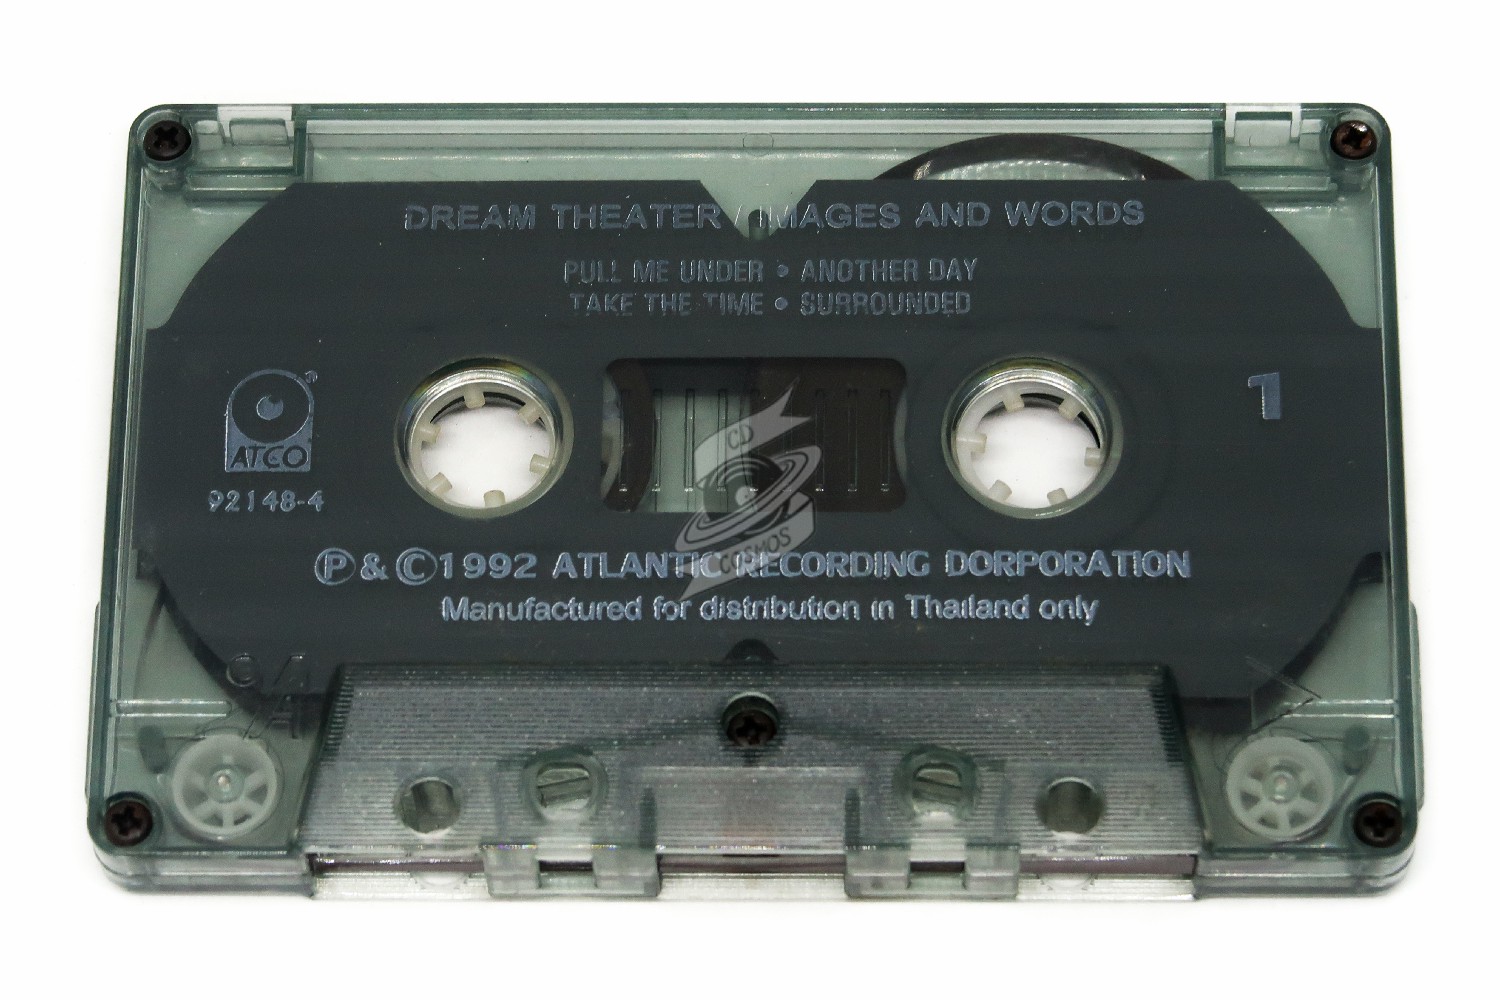 Dream Theater Images and Words Cassette Tape